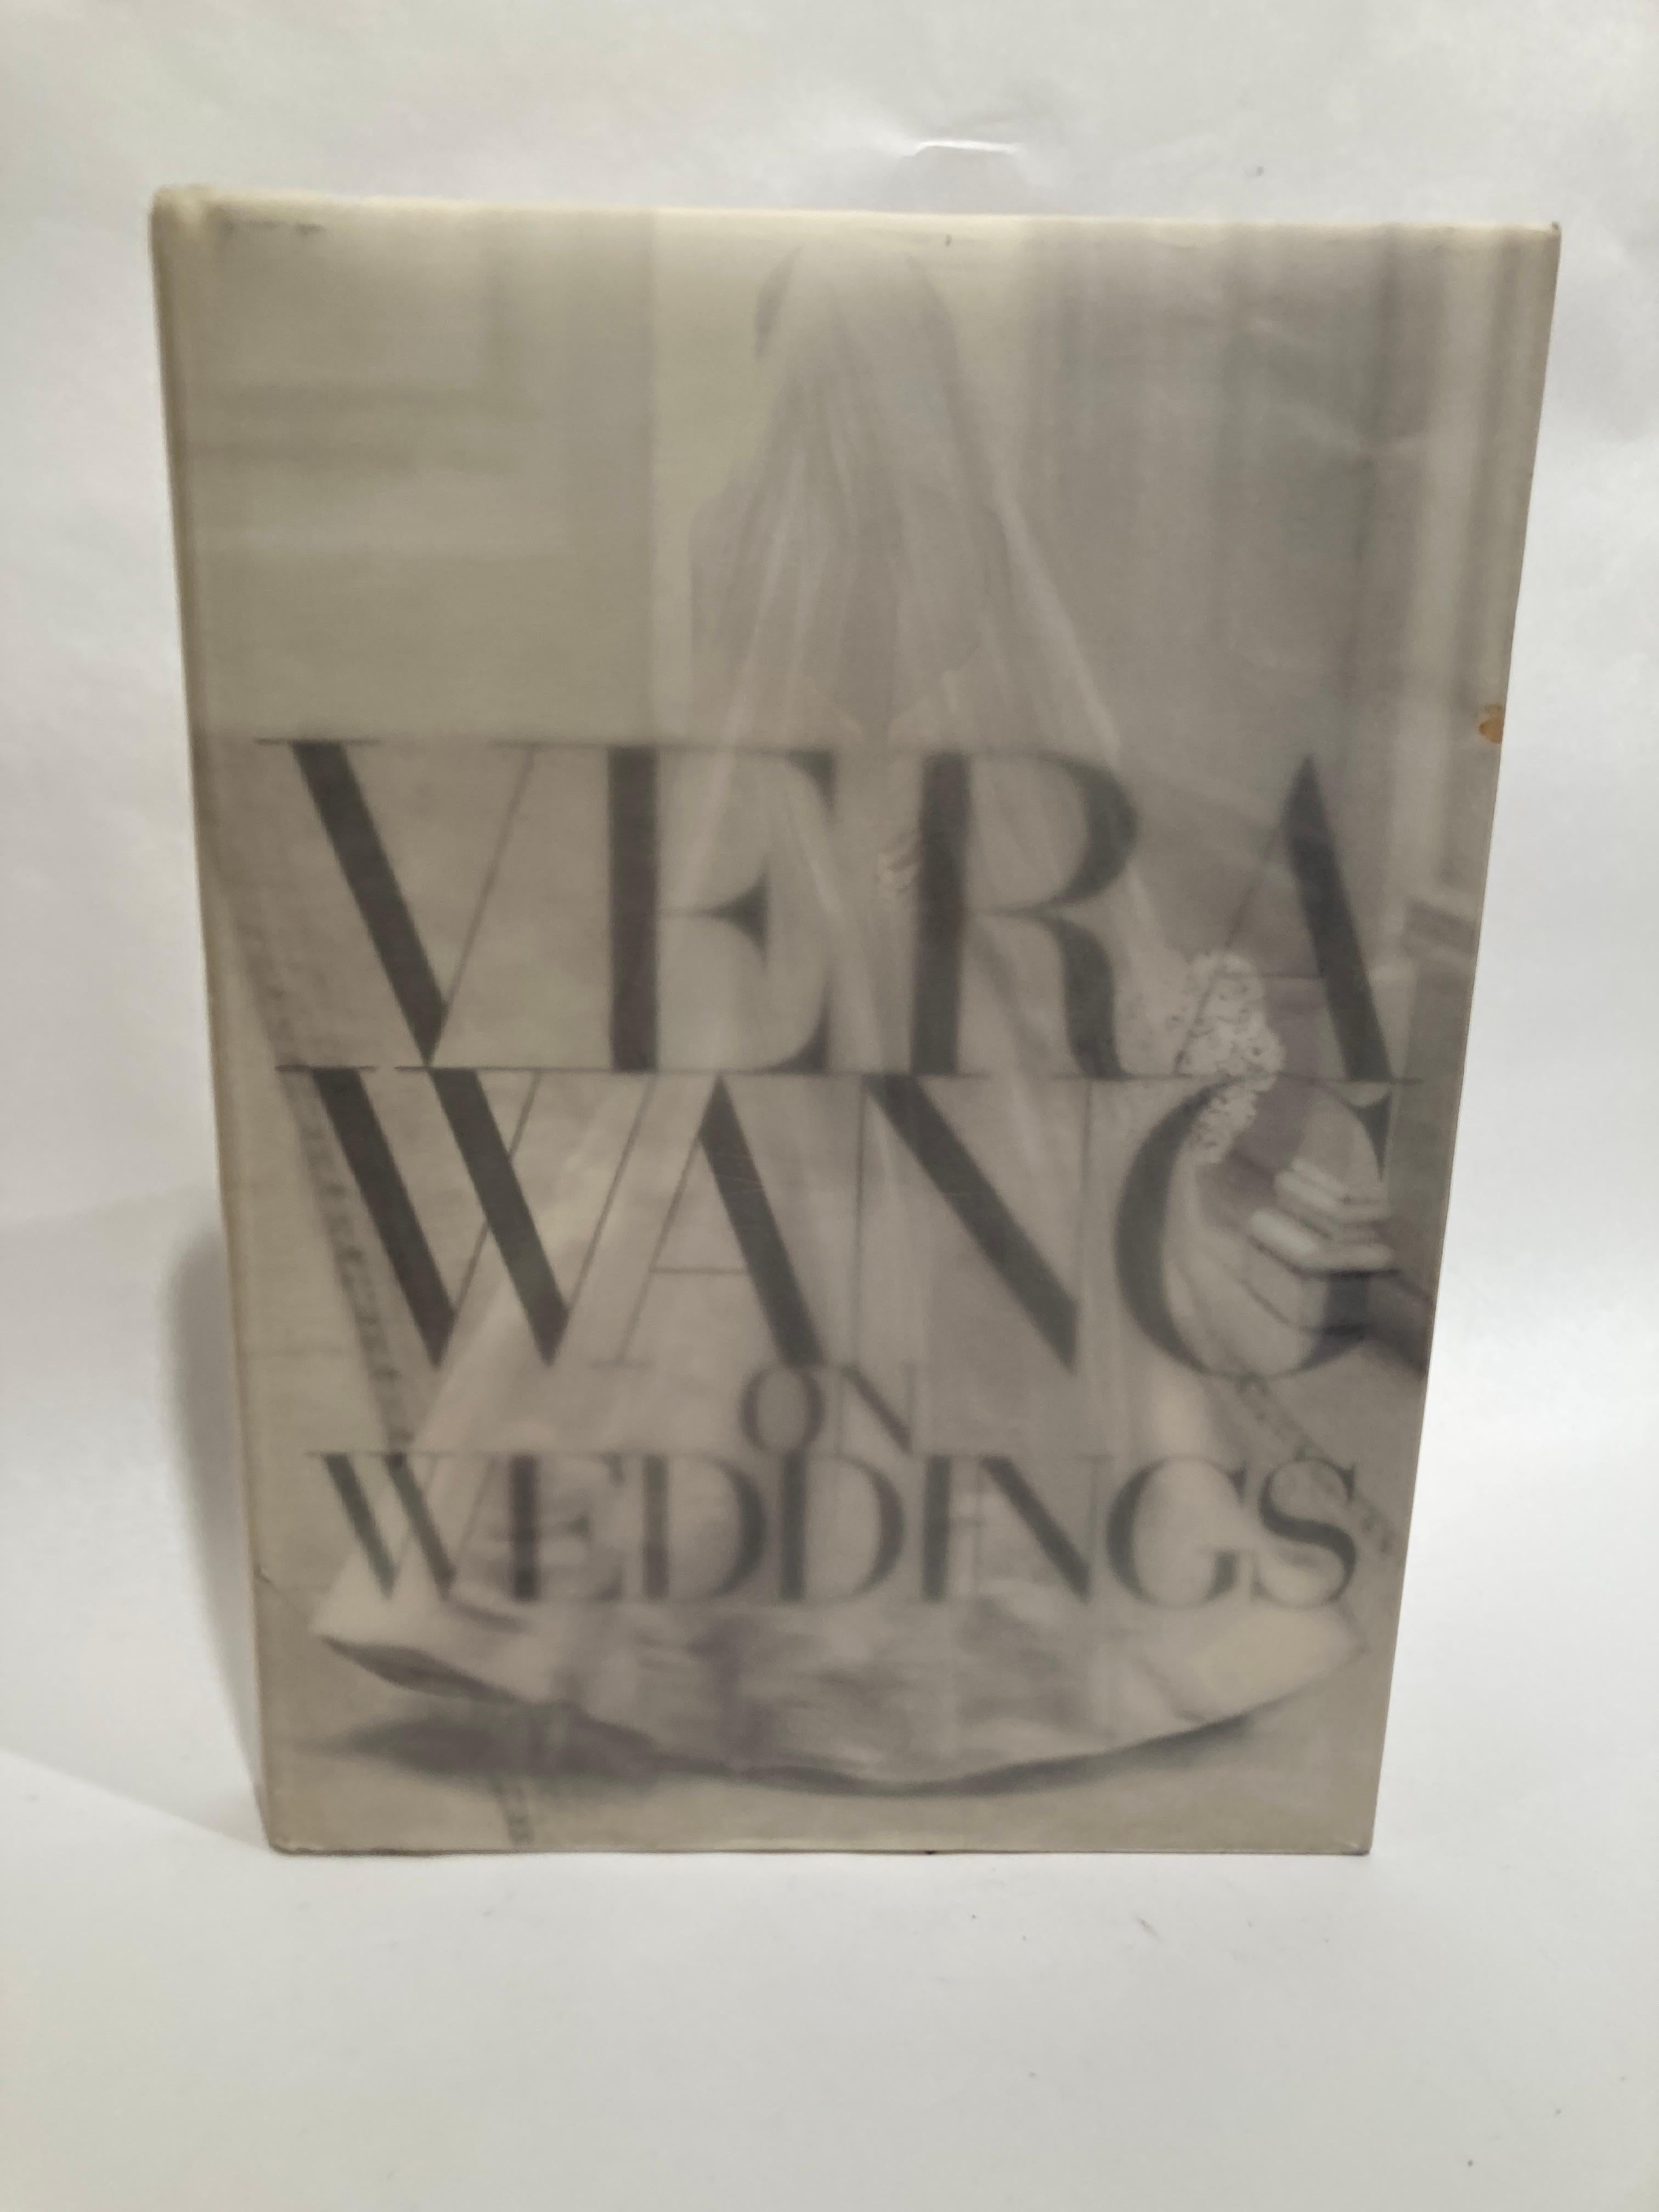 Gray Vera Wang On Weddings by Vera Wang Large Hardcover Book For Sale